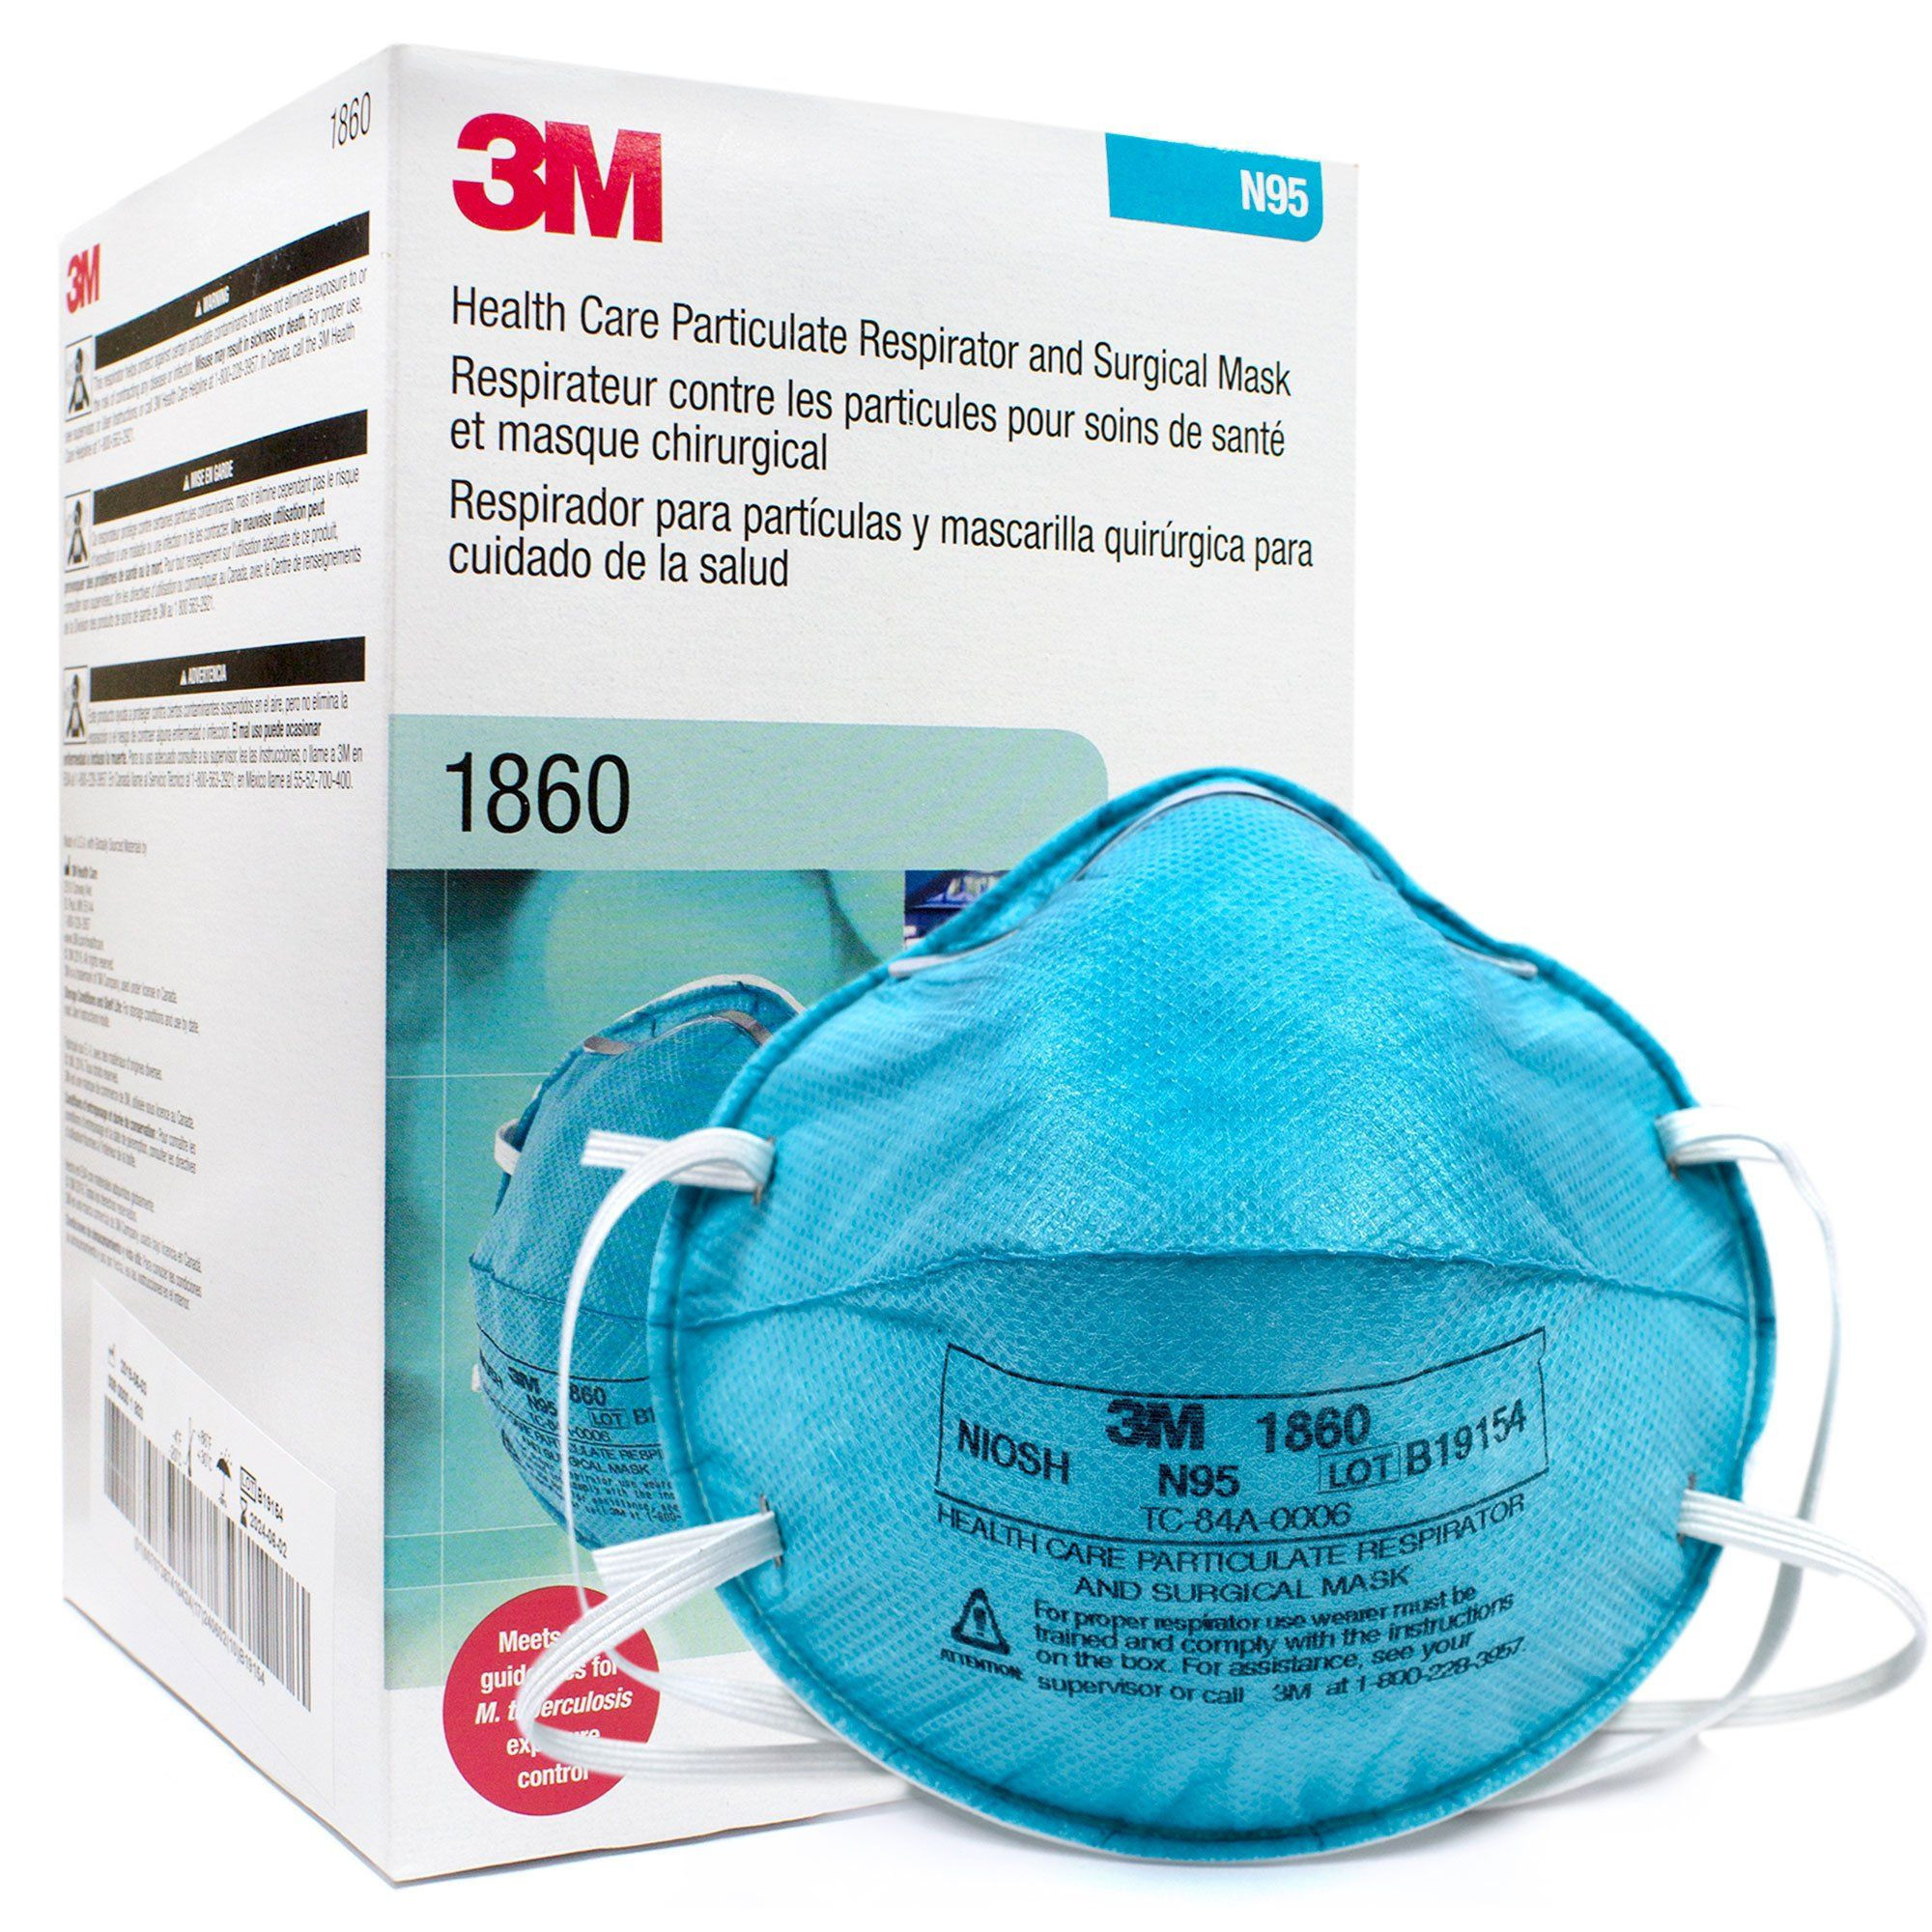 3m n95 particulate respirator mask